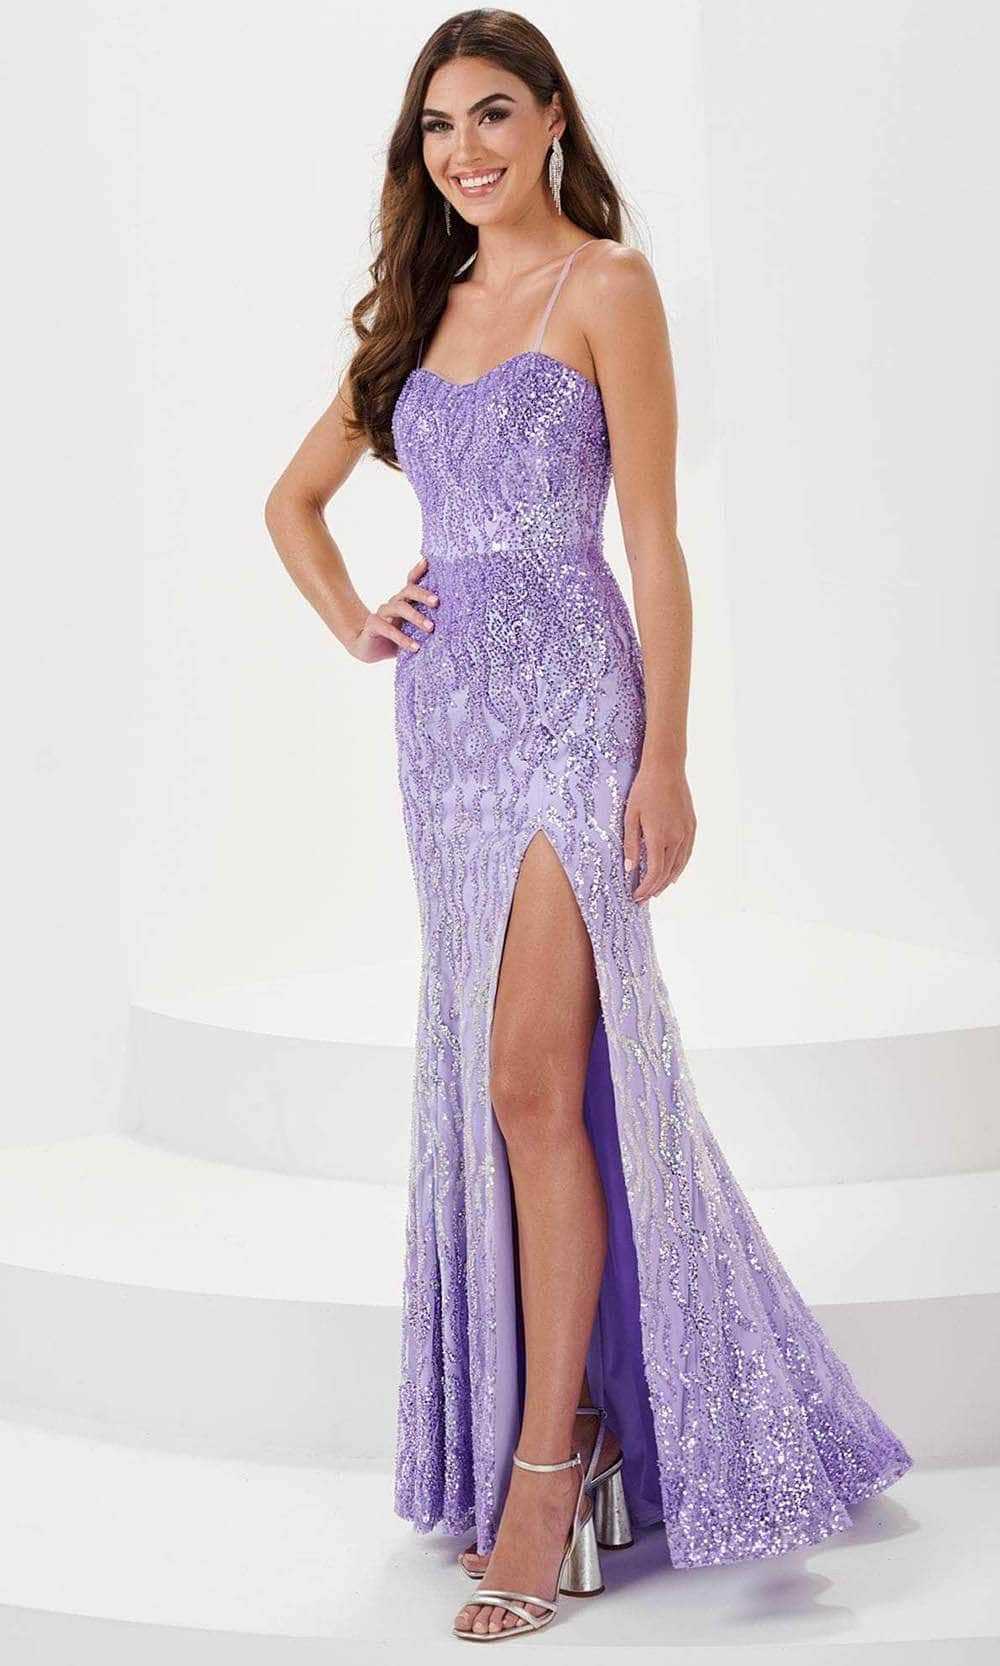 Panoply, Panoply 14162 - Sweetheart Sequin Evening Gown